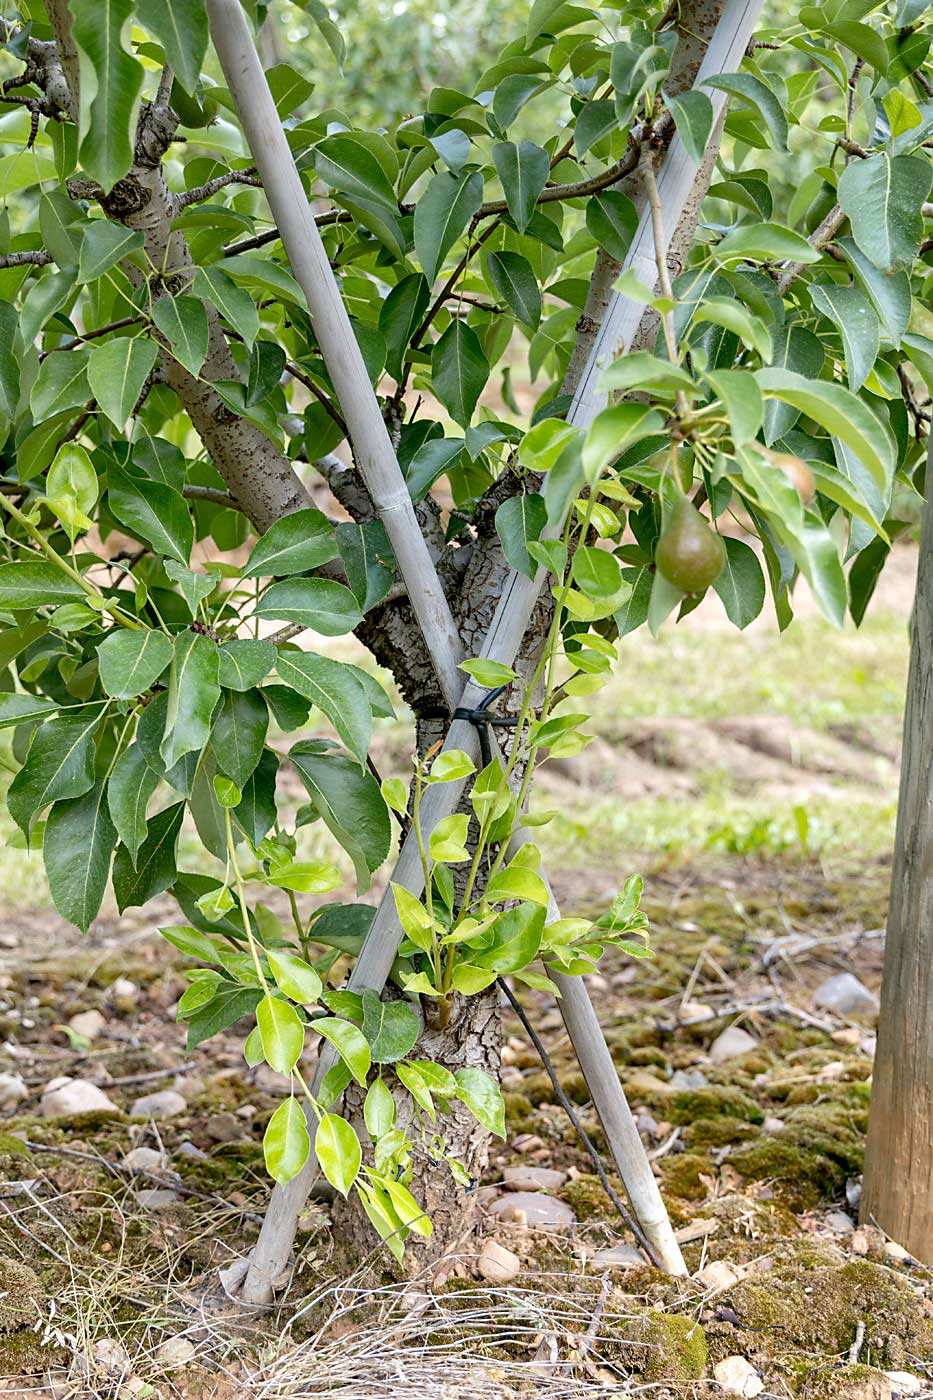 In their V-trained pear trees, Spurr Bros. uses bamboo canes to guide the leaders. One of the difficulties with V-trained pears is keeping the strong leader calm so the weak leader can catch up, Jenereaux said. (Matt Milkovich/Good Fruit Grower)